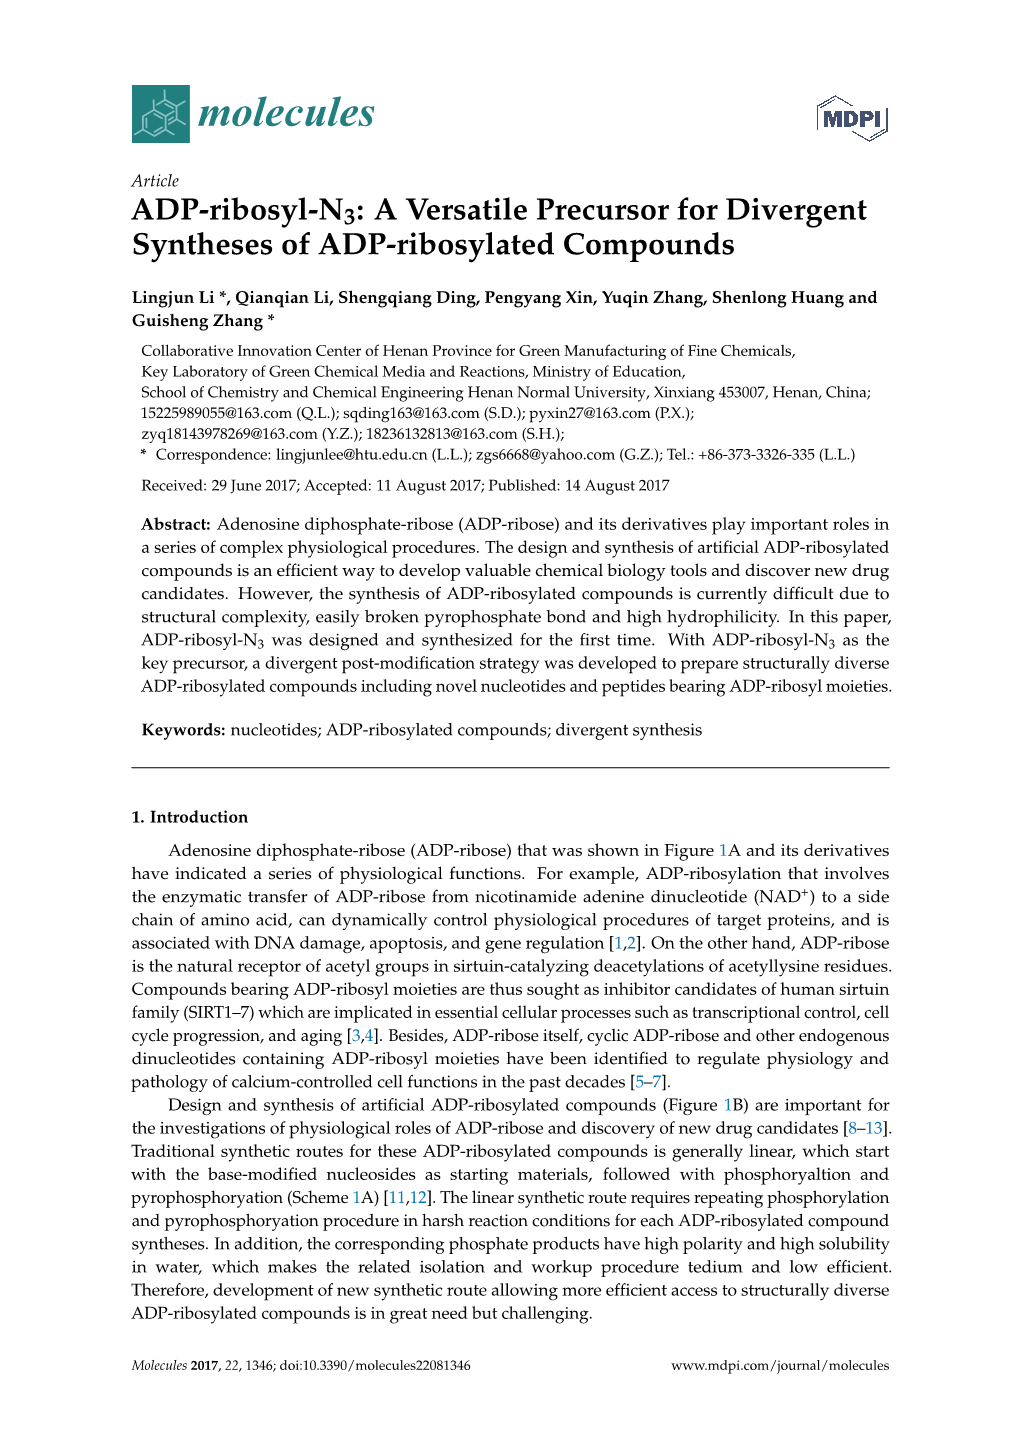 ADP-Ribosyl-N3: a Versatile Precursor for Divergent Syntheses of ADP-Ribosylated Compounds